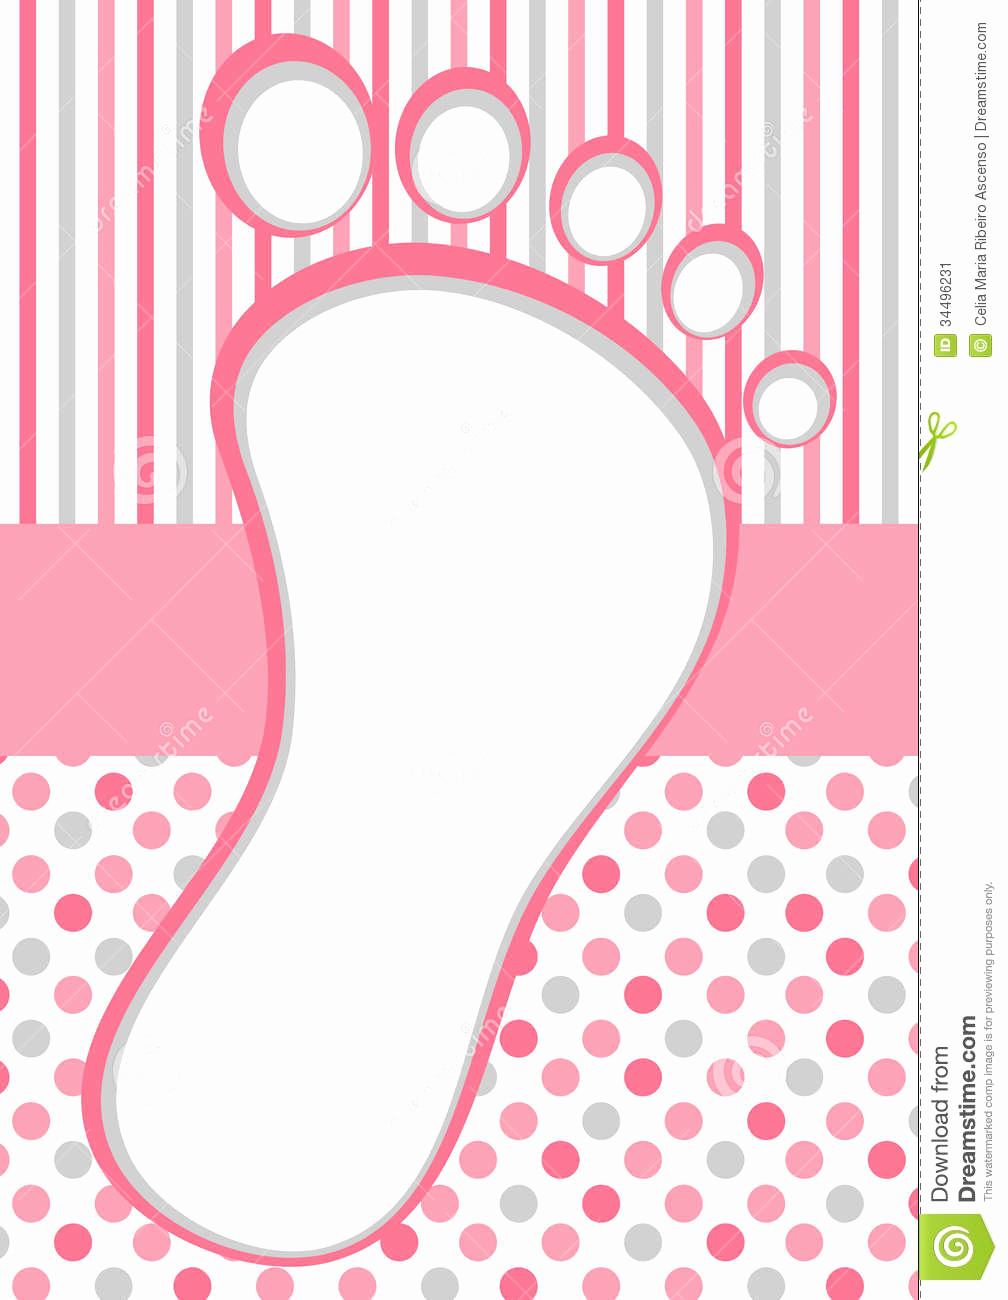 Baby Shower Invitation Borders Lovely Pink Baby Foot Frame with Polka Dots and Stripes Stock